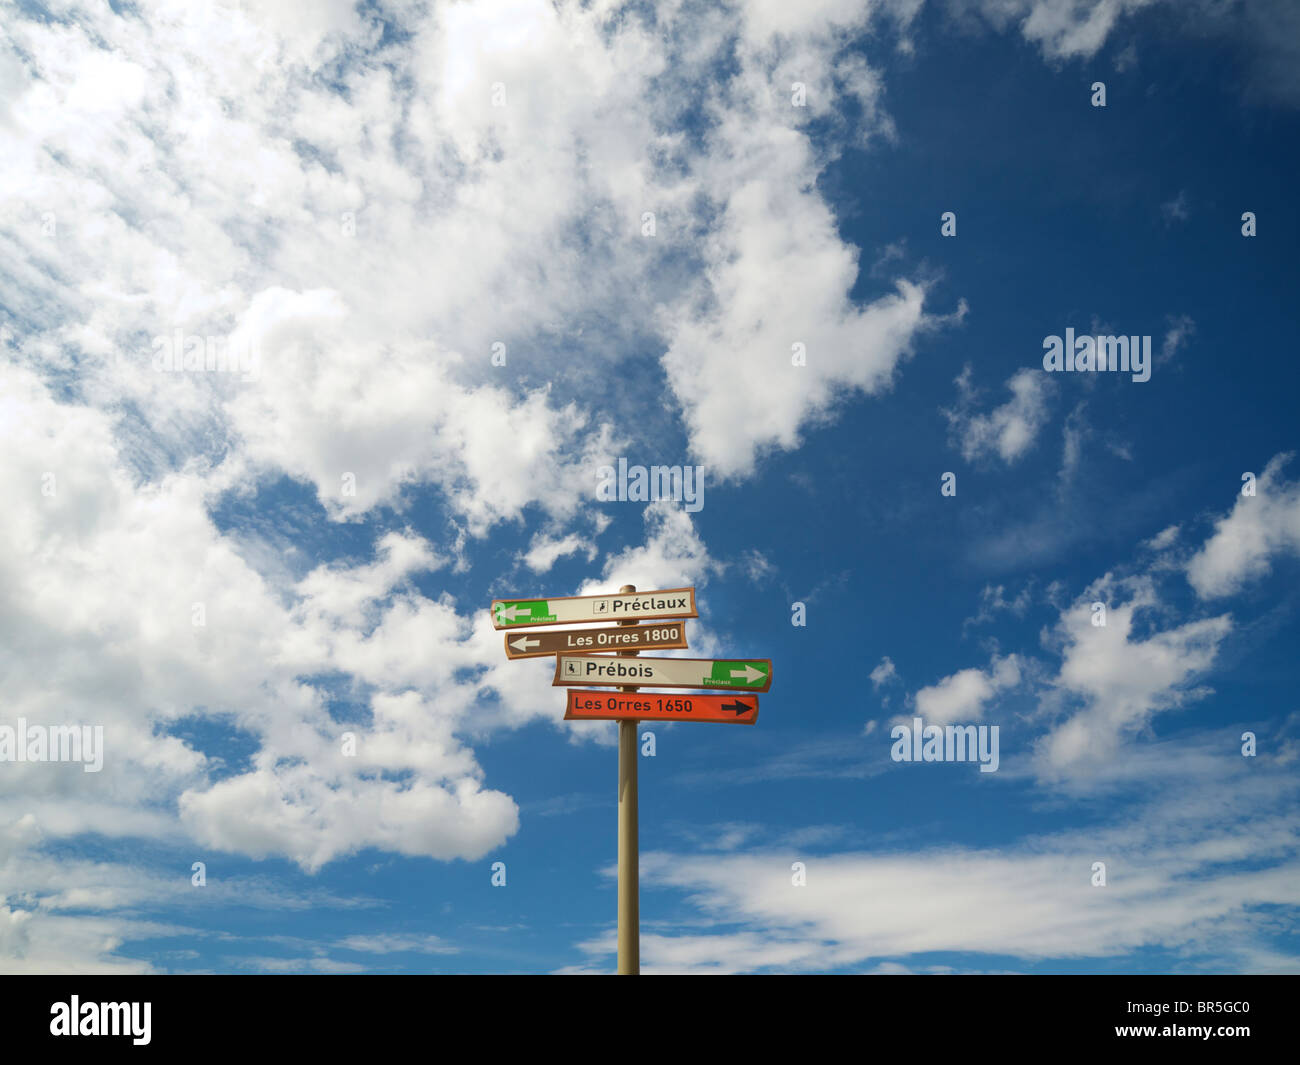 Skiing signs in Les Orres, Hautes Alpes, France with nice blue sky with clouds Alps alt 1800m Stock Photo